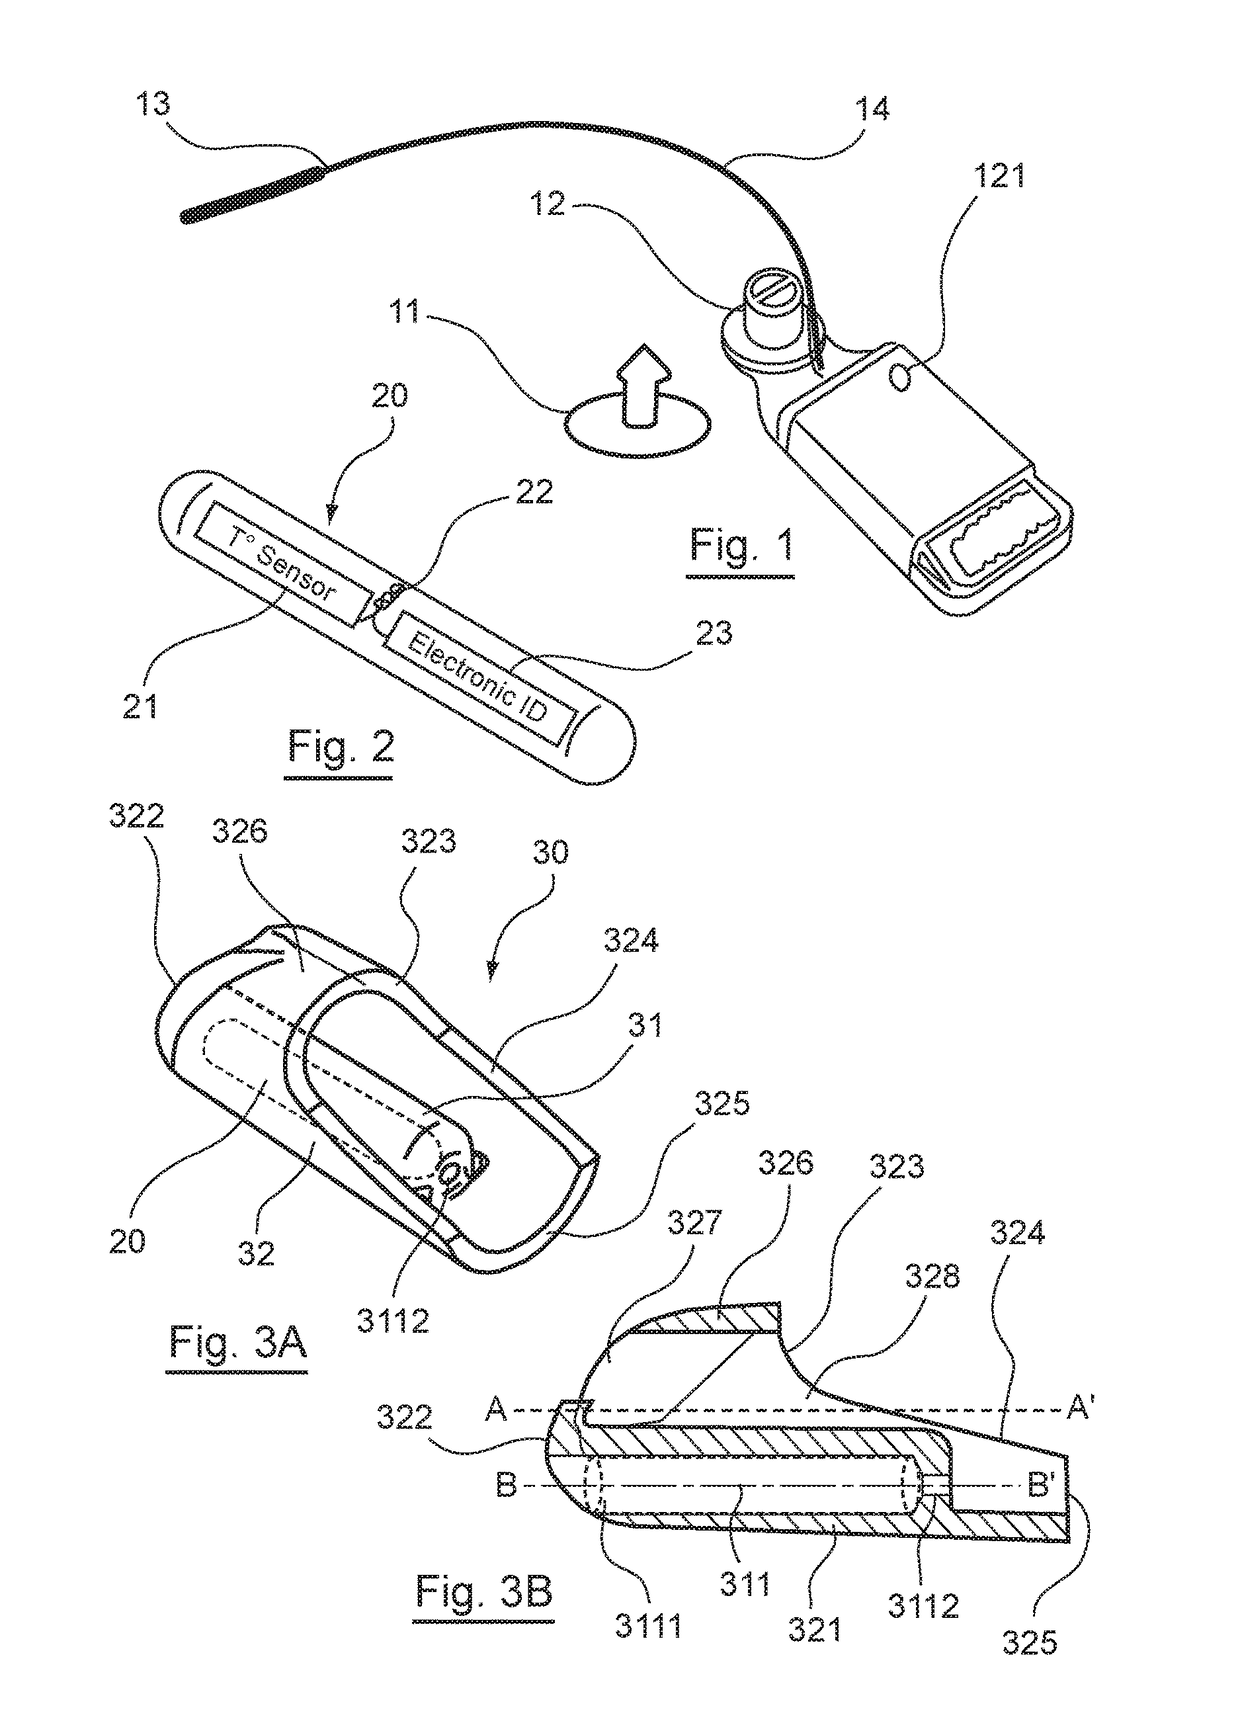 Device for Fixing a Temperature Sensor Intended to be Placed in the Auditory Canal of an Animal